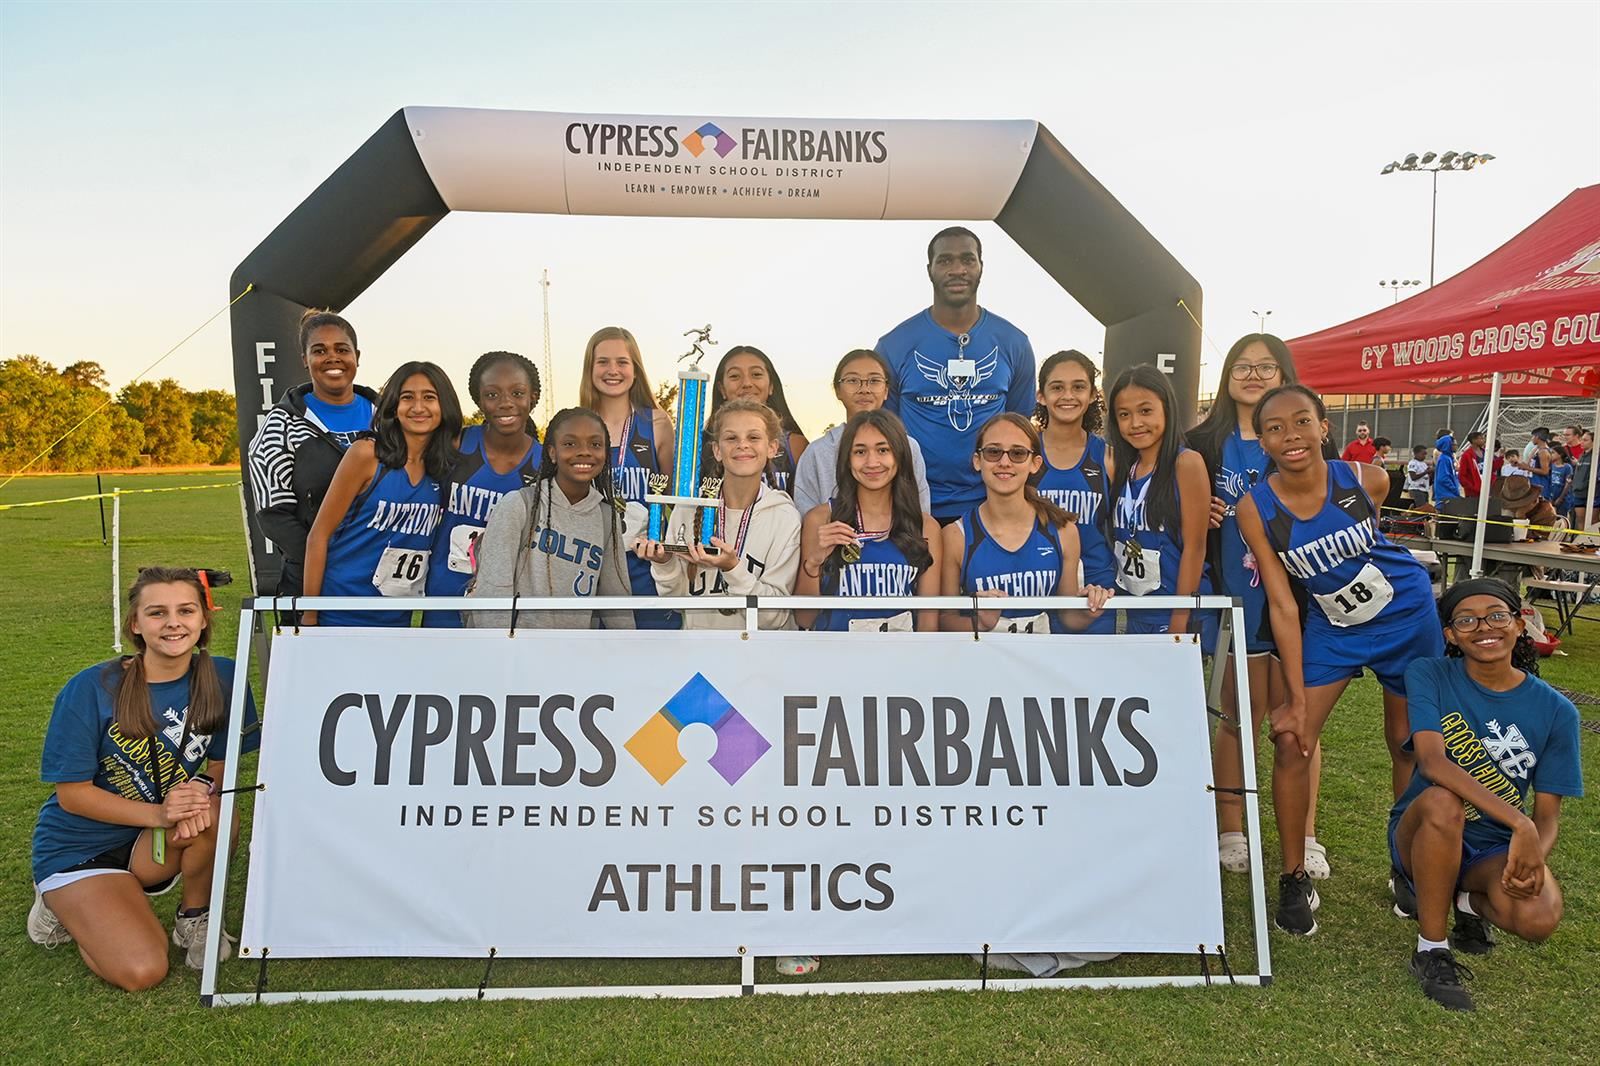 Anthony Middle School won the seventh grade girls’ cross country team championships with a score of 44 points on Oct. 19.